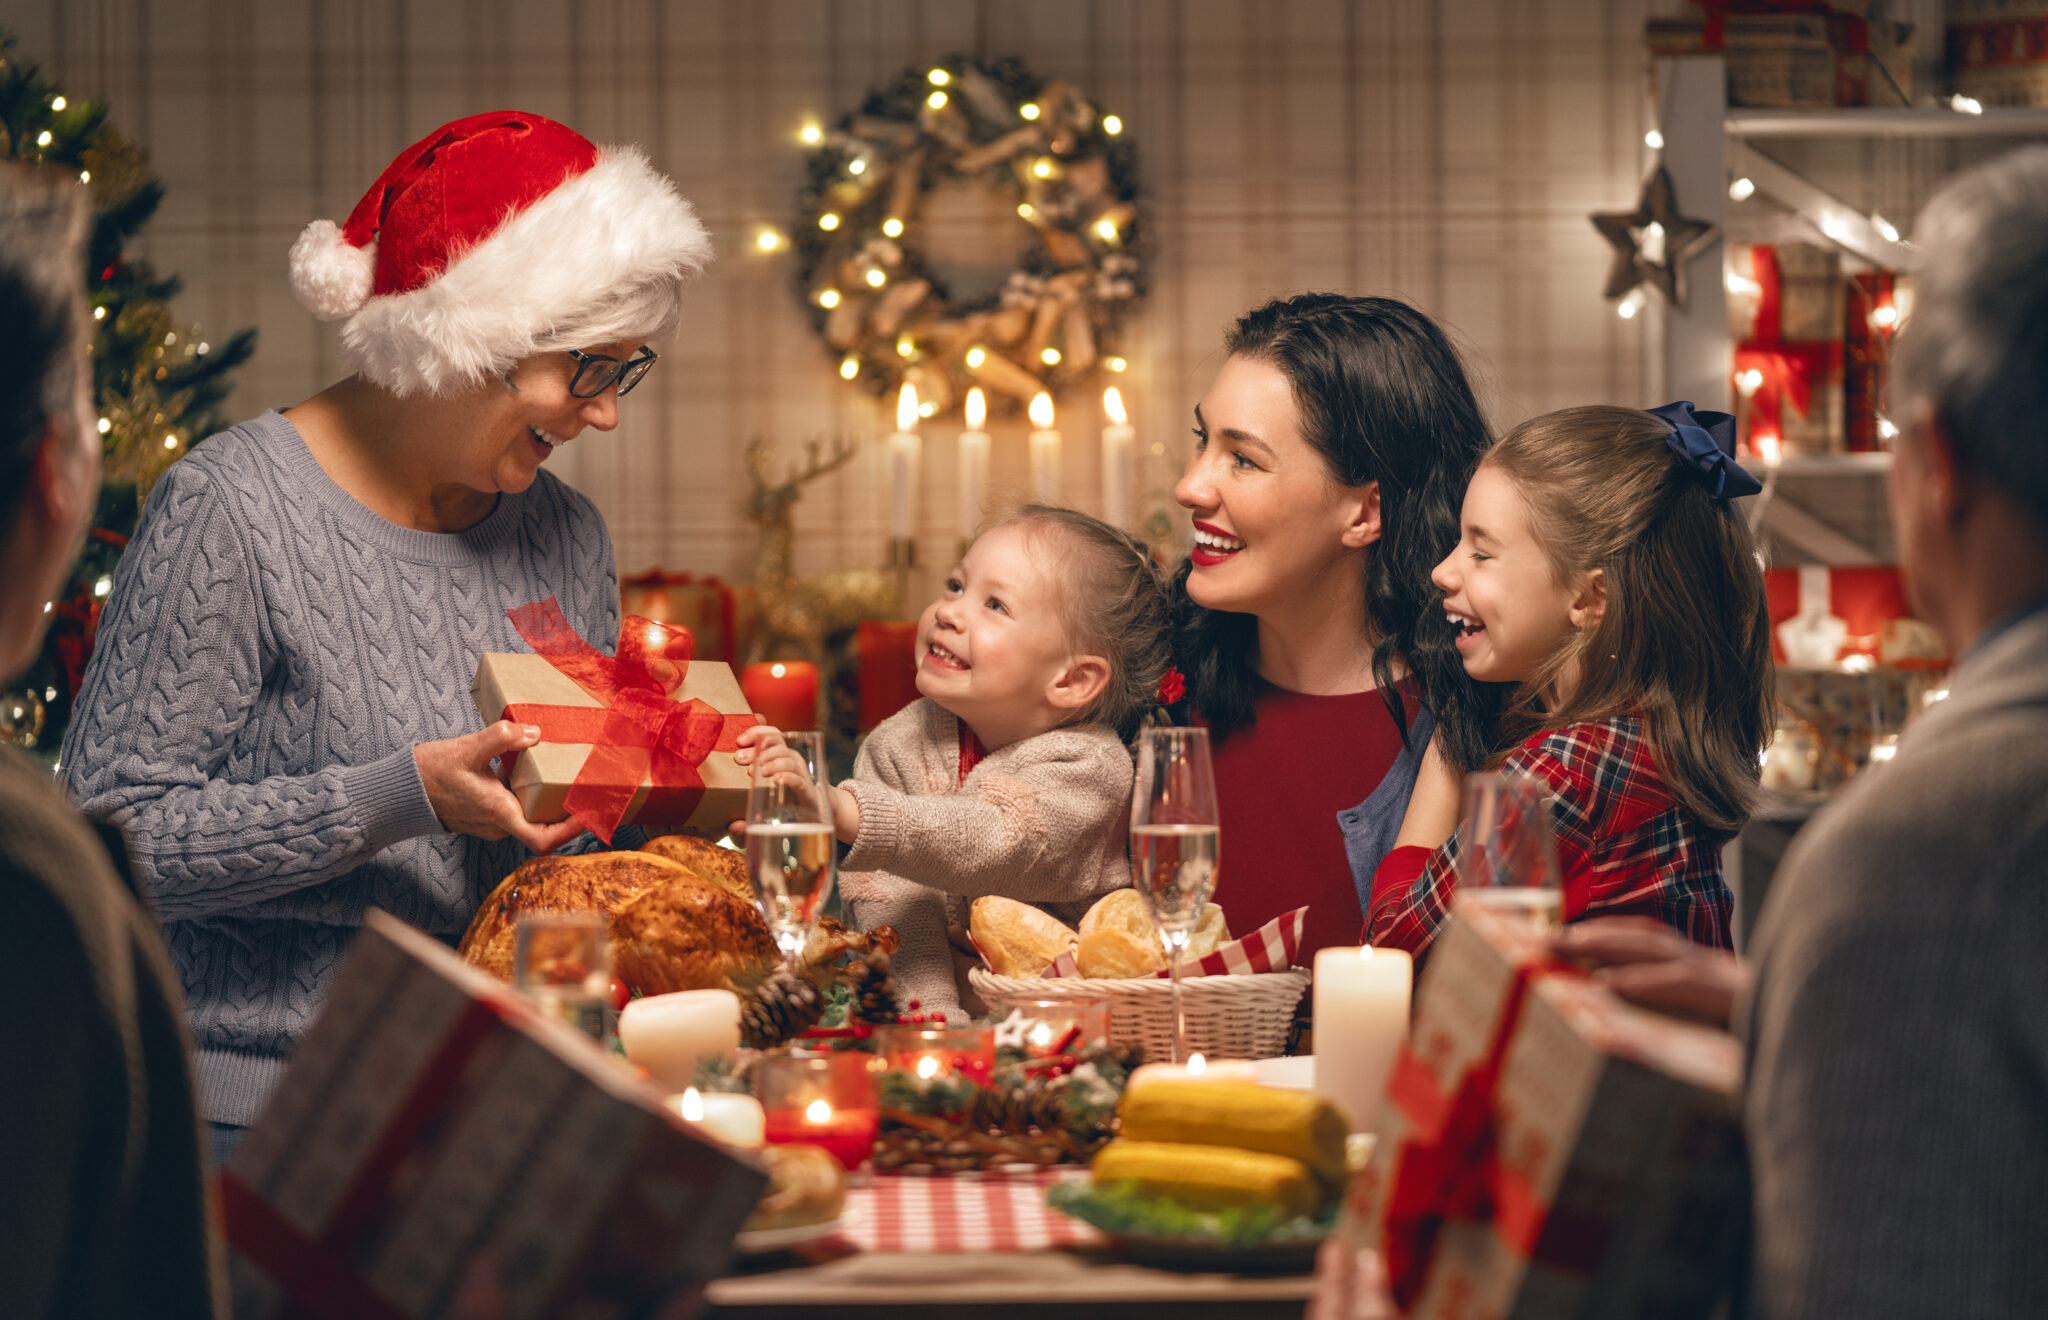 Keeping your smile healthy this holiday